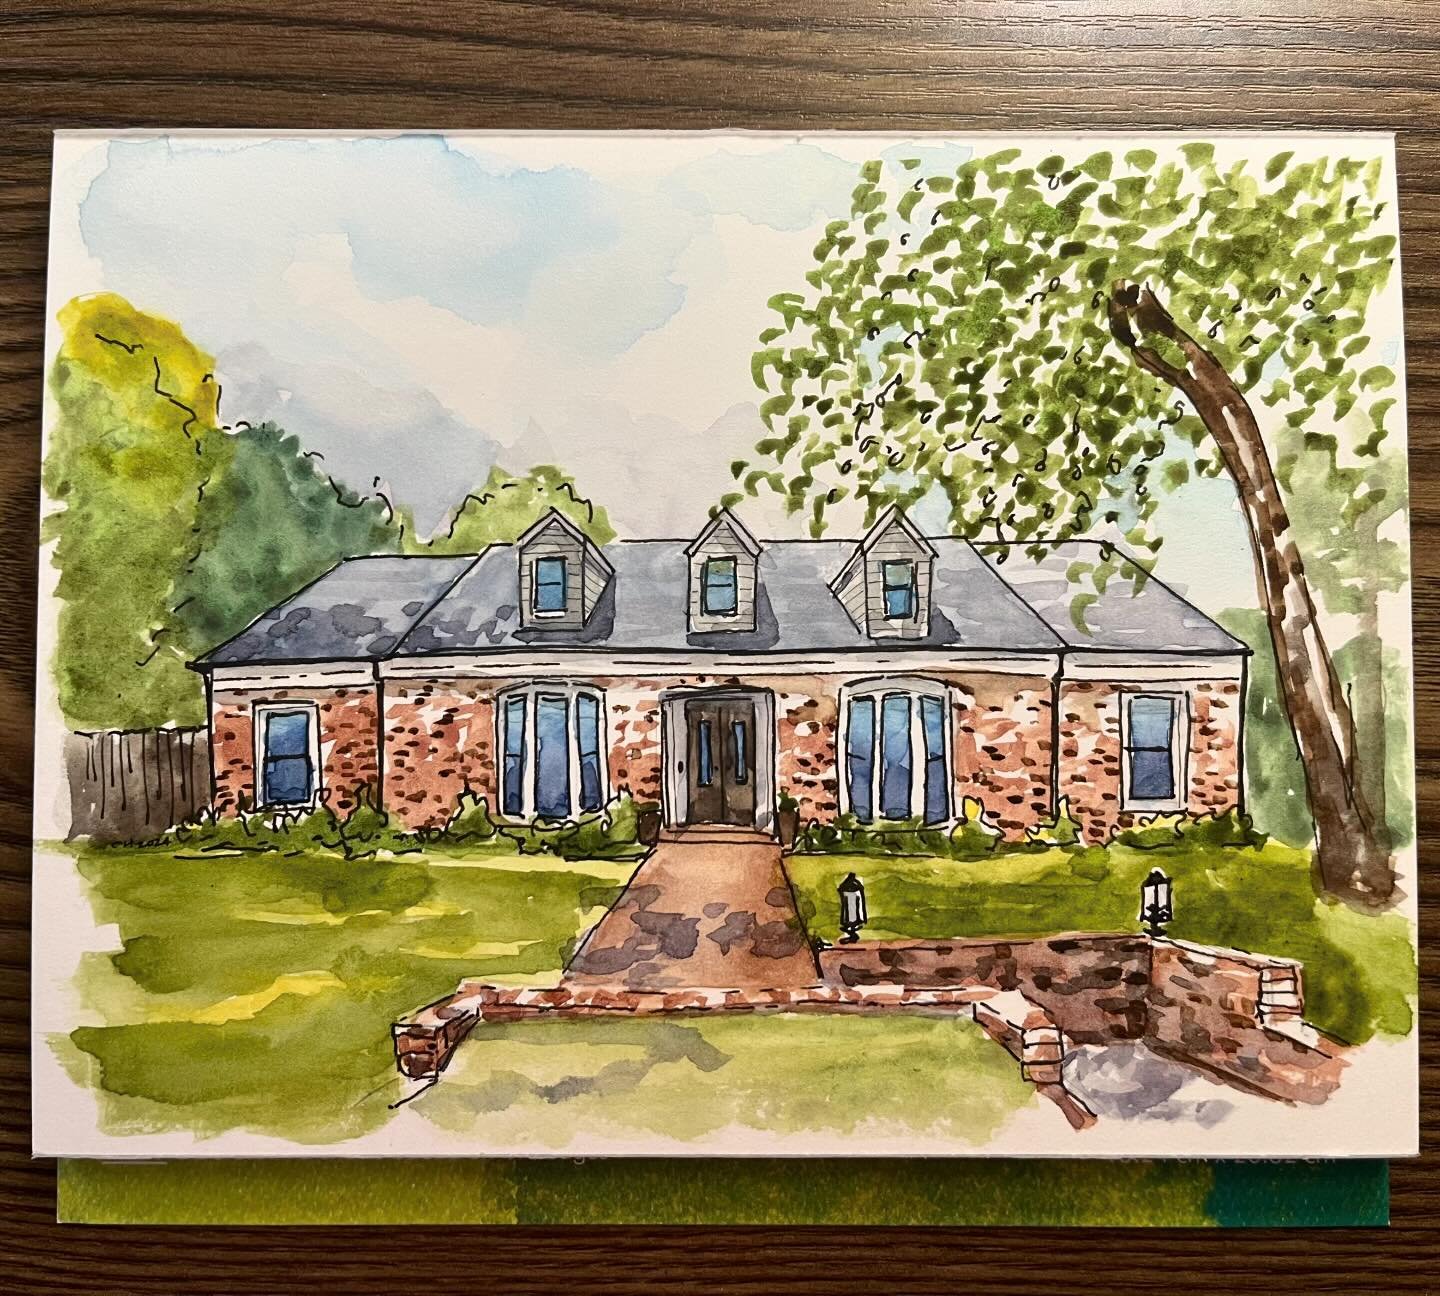 Coming full circle with a #houseportrait for @carson.guarino and @iamrorysocanyou . Carson launched this little side endeavor when she asked me to draw their respective houses before they married, and now the triptych is complete with the house they 